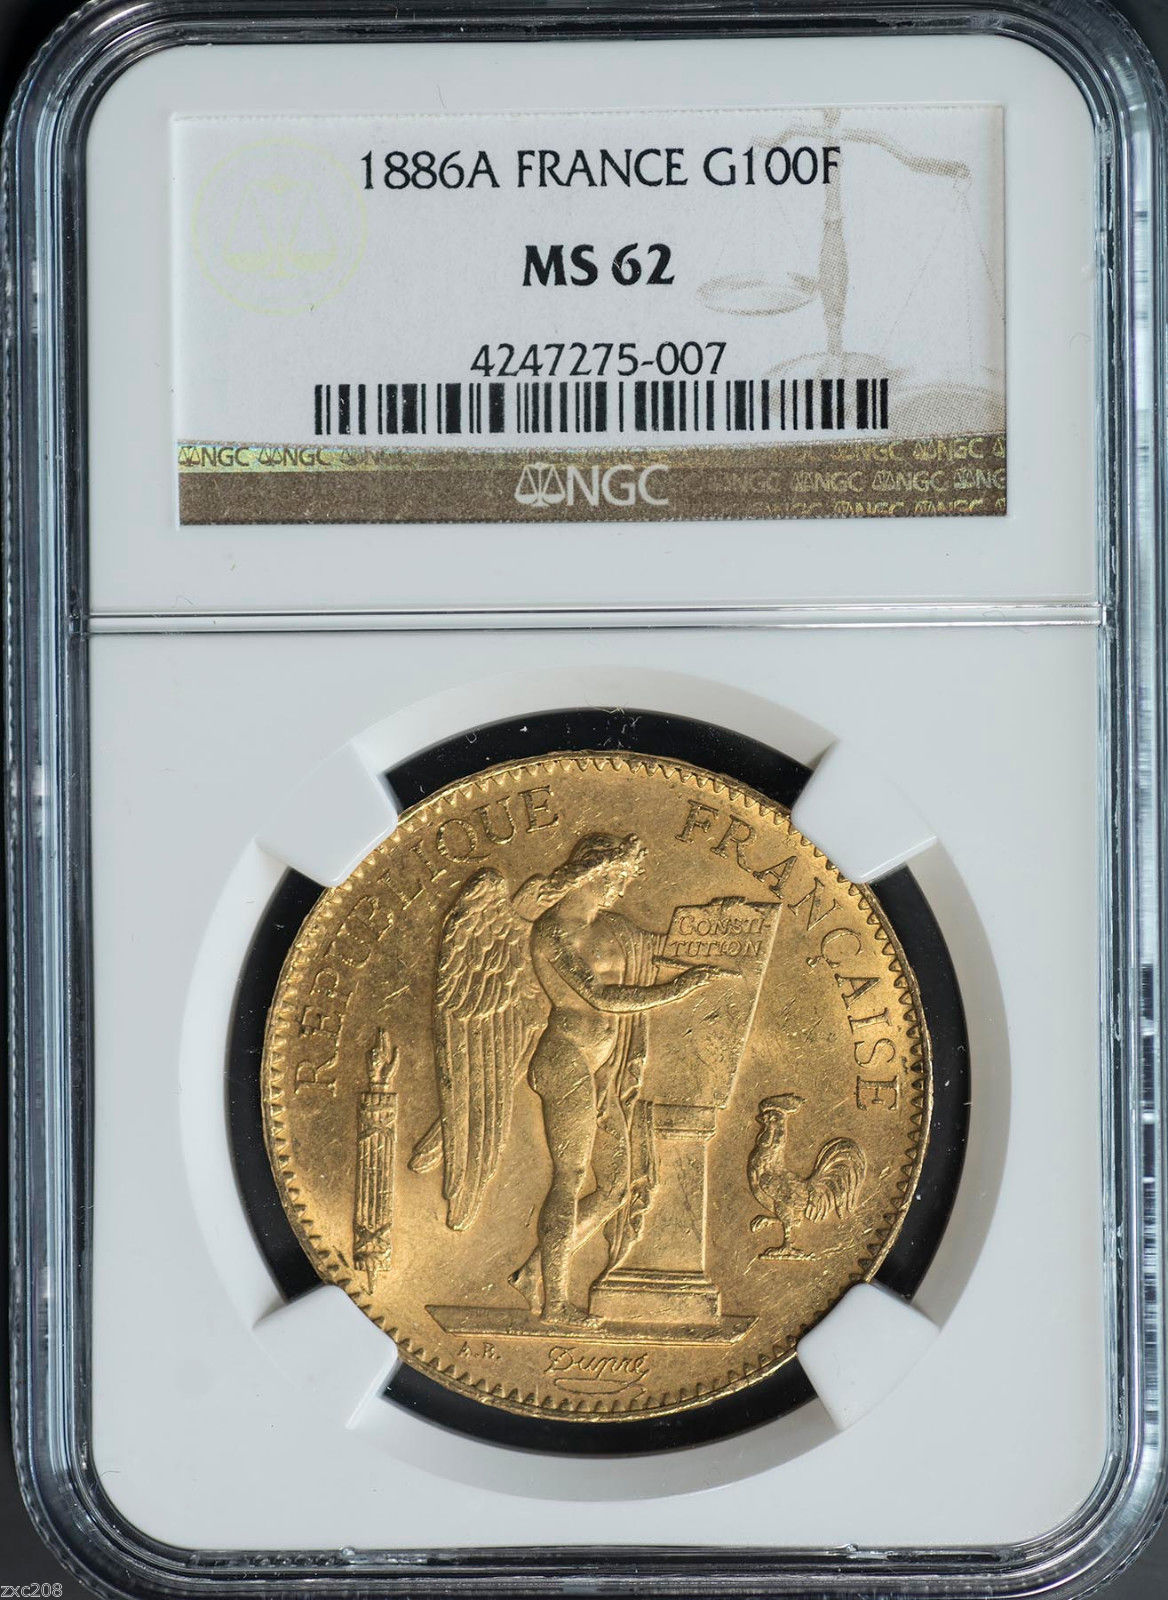 Gold 100 Francs 1886-A France MS-62 NGC - Coin – Powell Coins